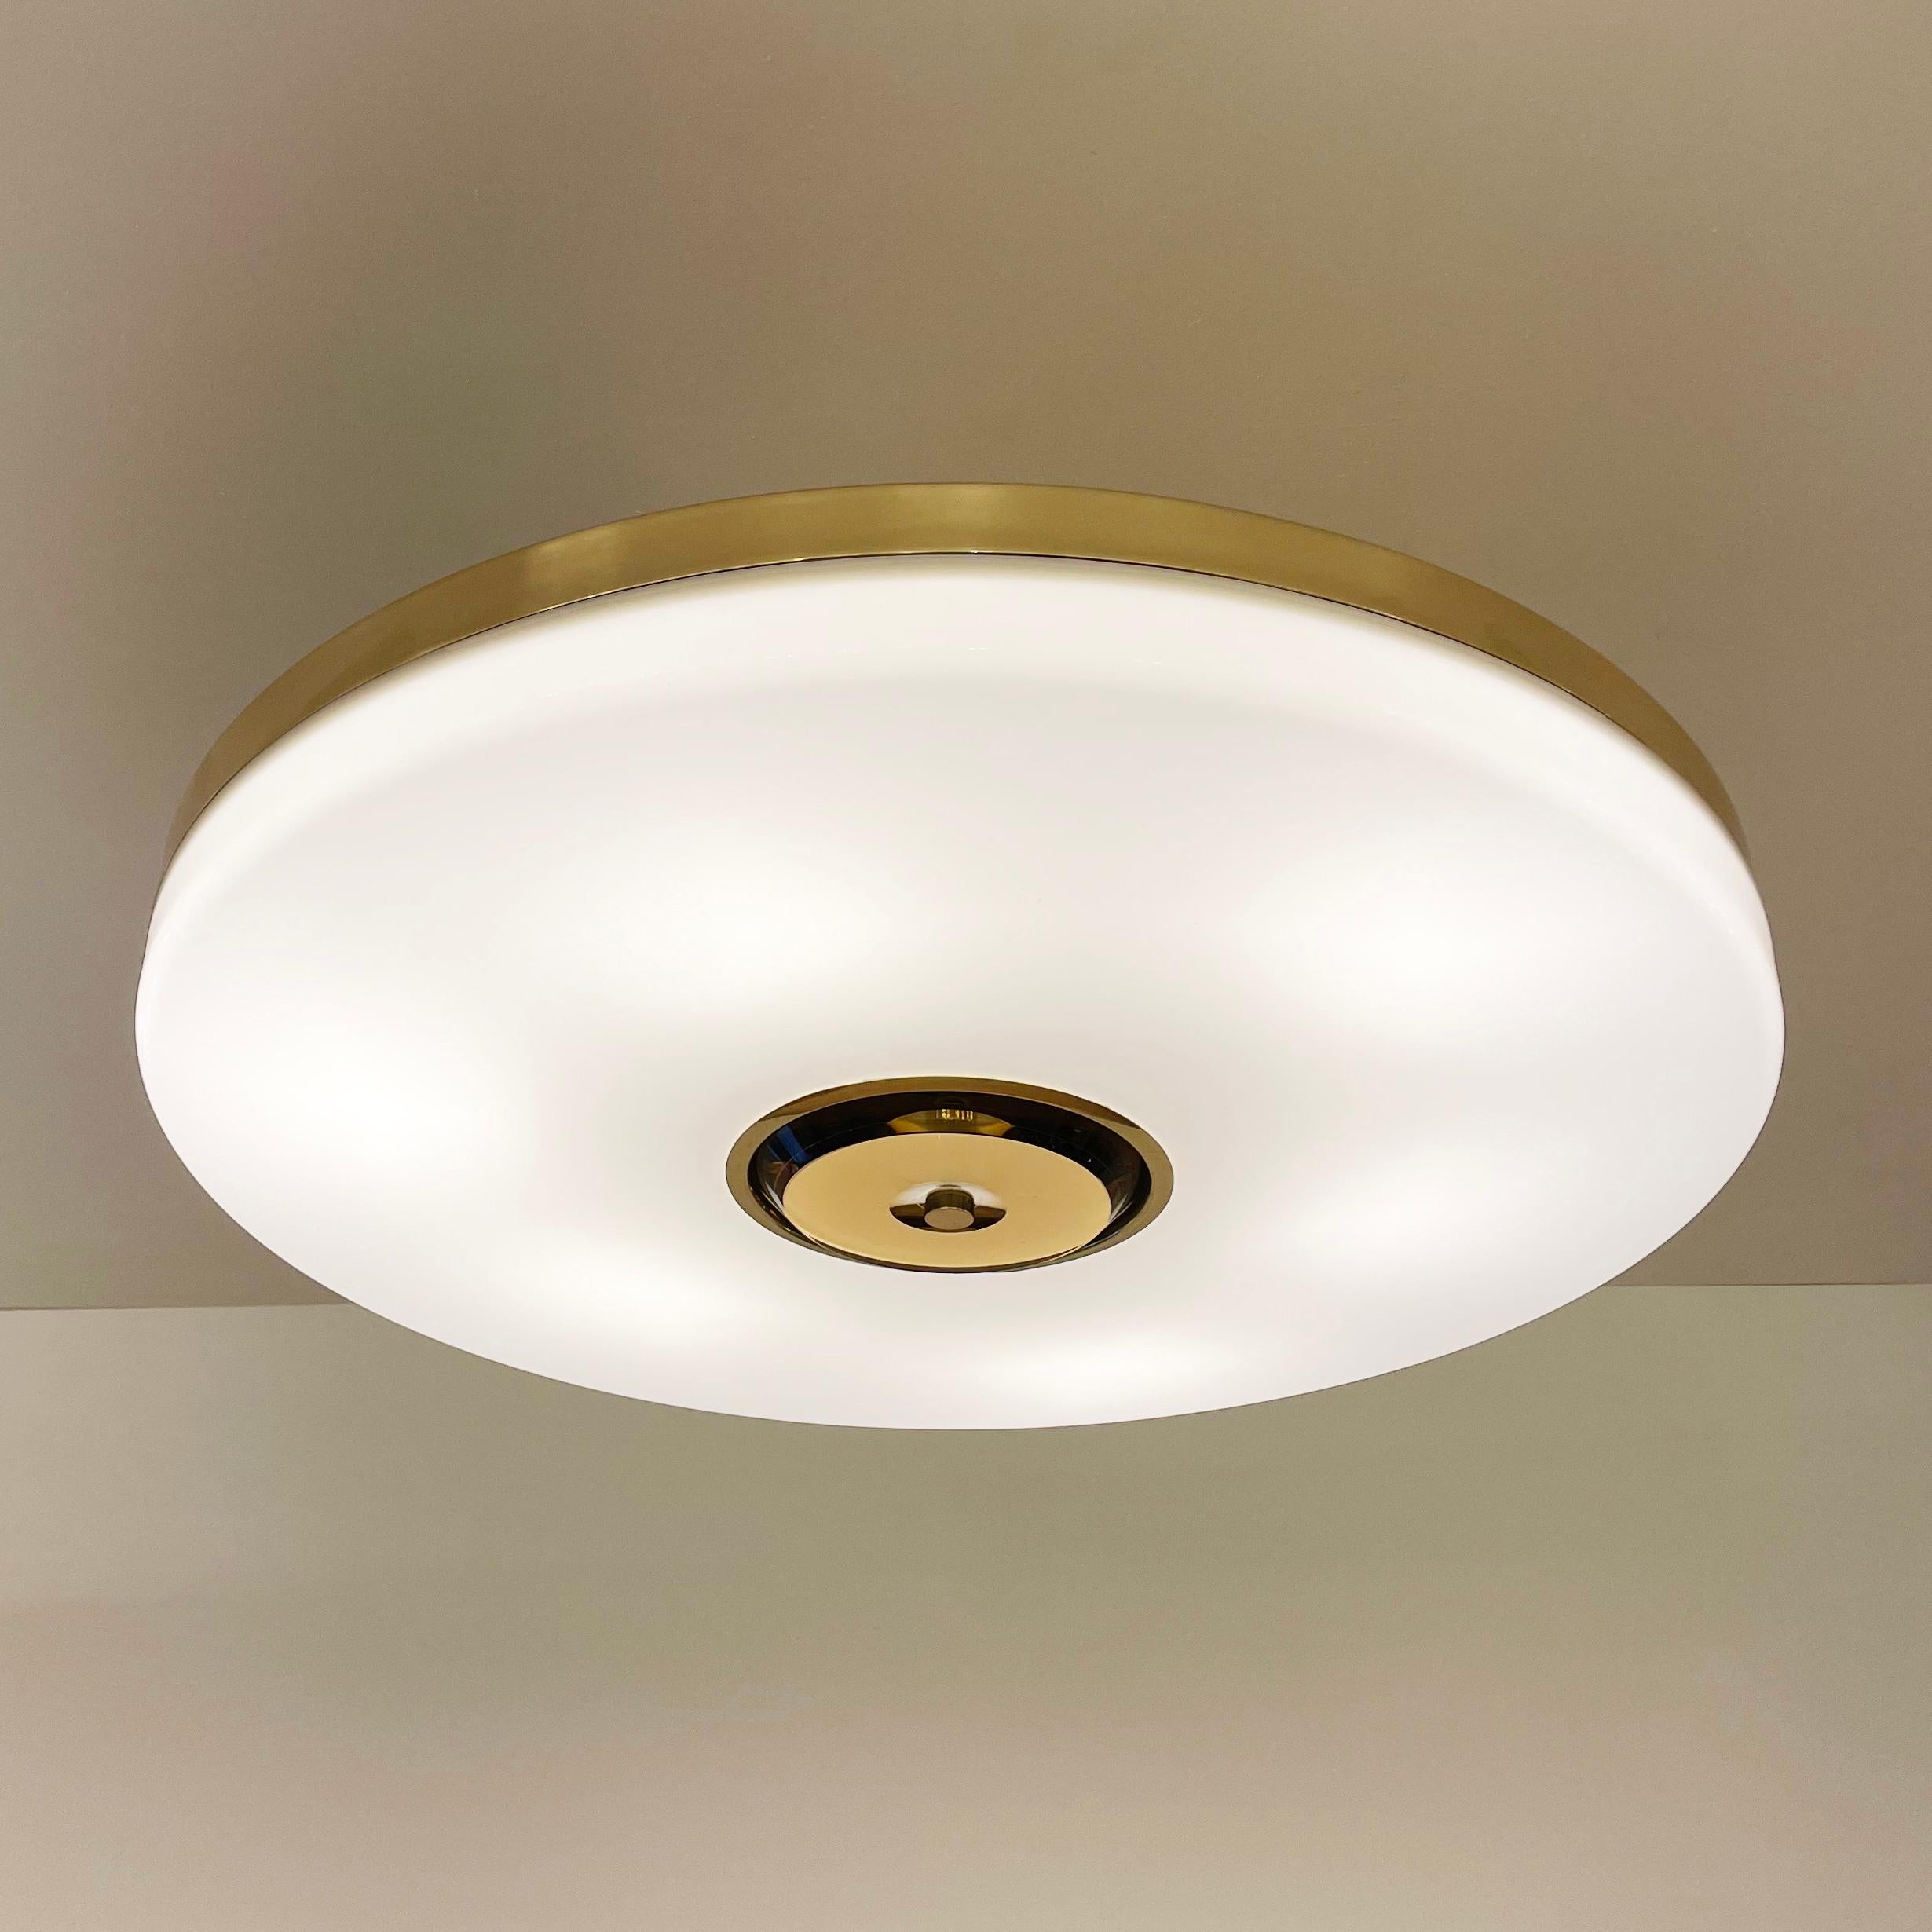 Brass Iris Ceiling Light by Gaspare Asaro - Polished Nickel Finish For Sale